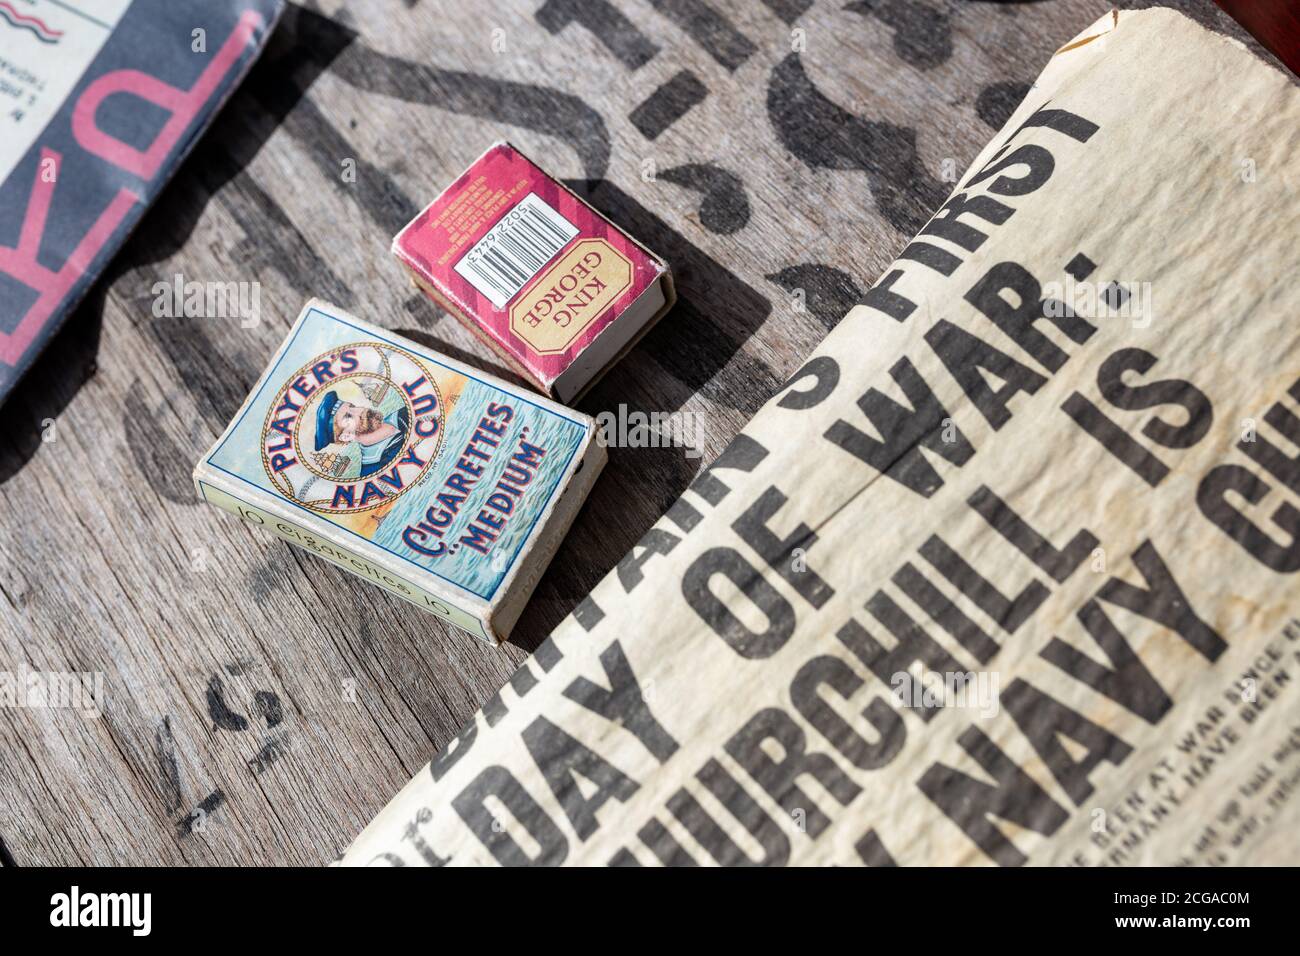 Players Navy Cut cigarettes, matches and old newspapers Stock Photo